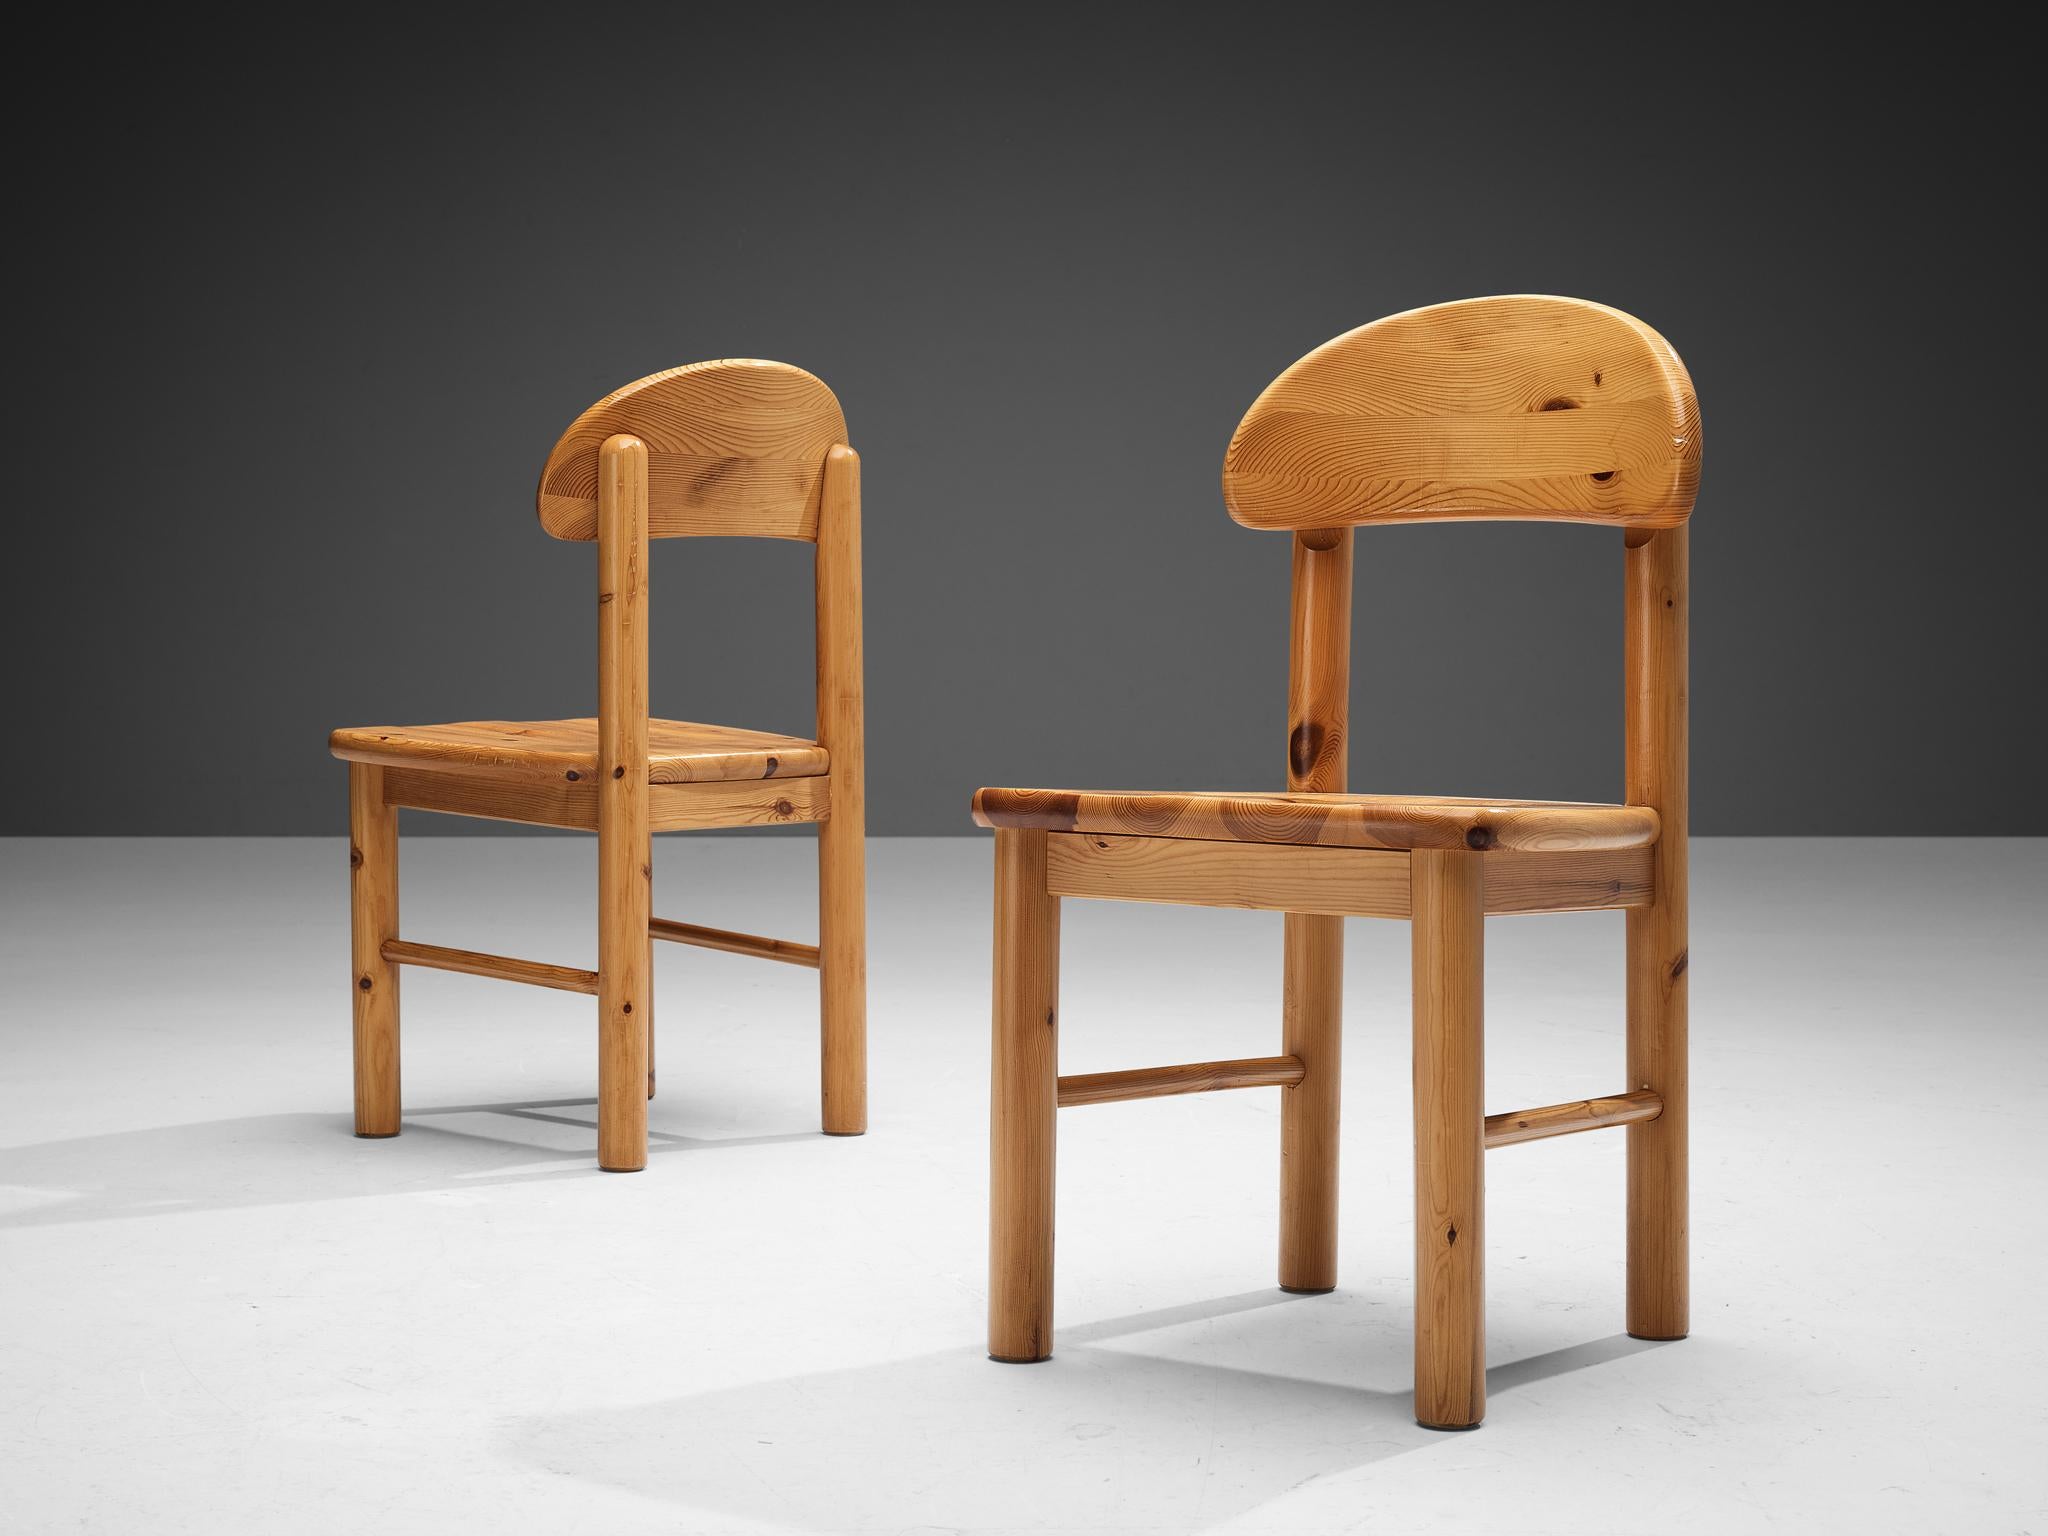 Rainer Daumiller for Hirtshals Sawmill, pair of dining chairs, pine, Denmark, 1970s

Beautiful, organic and natural dining chairs in solid pine. A simplistic design with a round seating and attention for the natural expression and grain of the